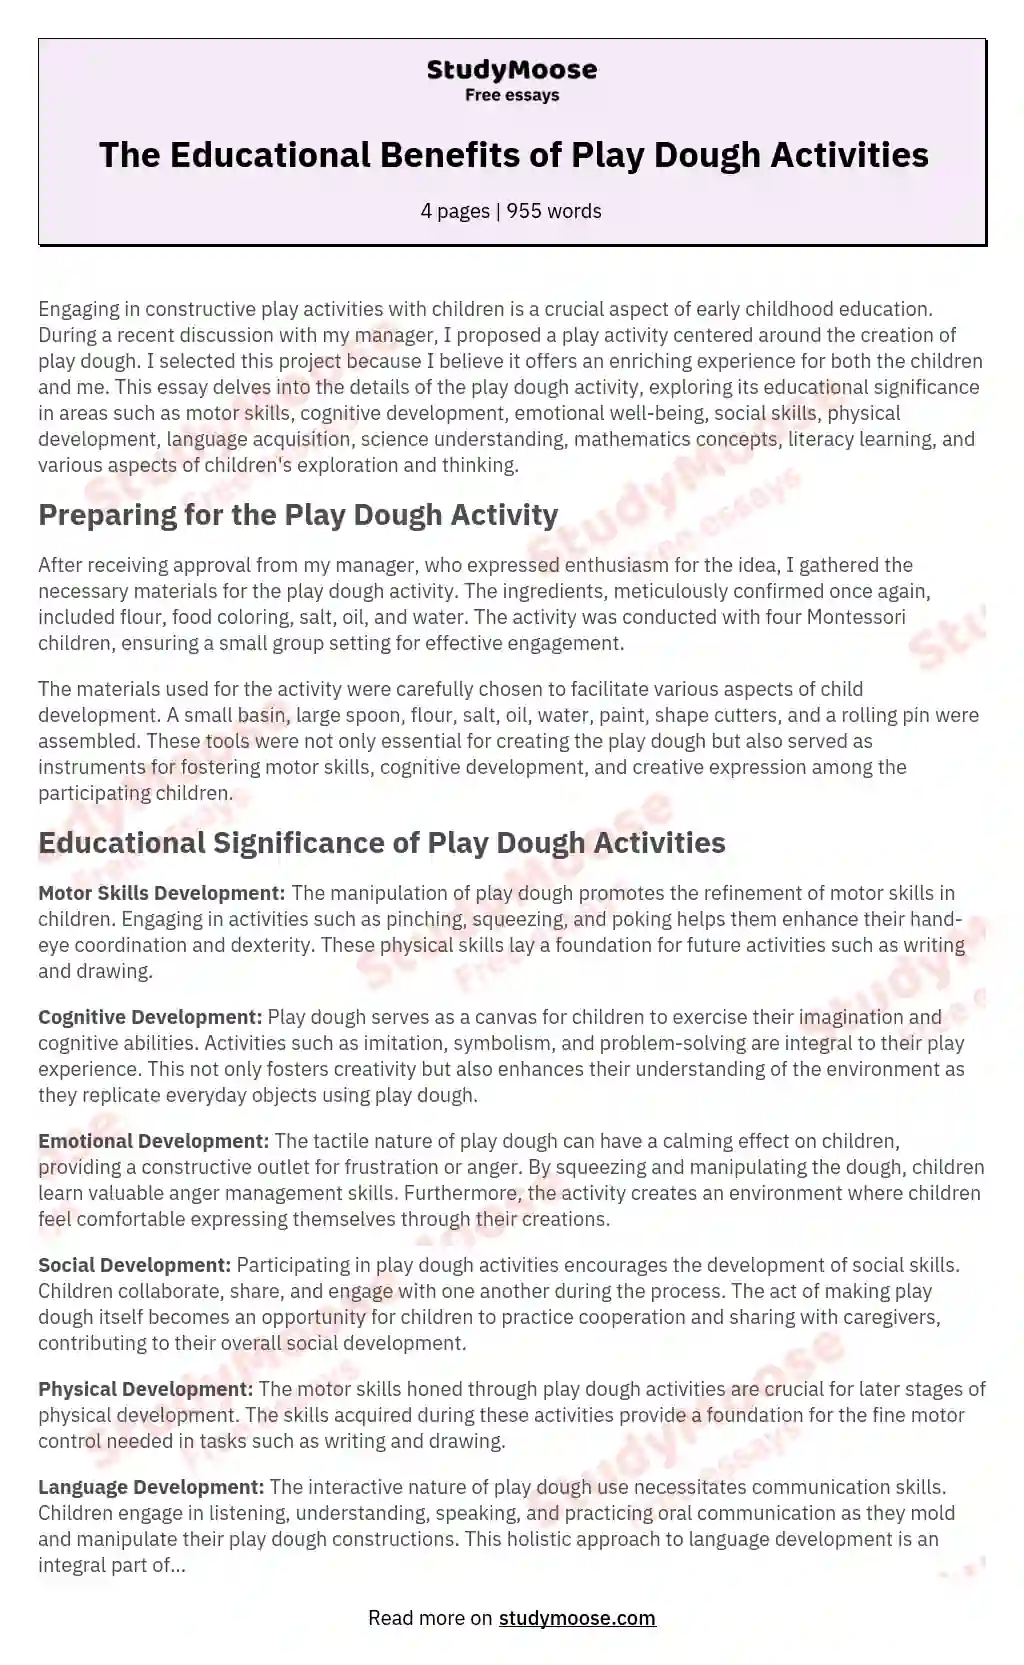 The Educational Benefits of Play Dough Activities essay